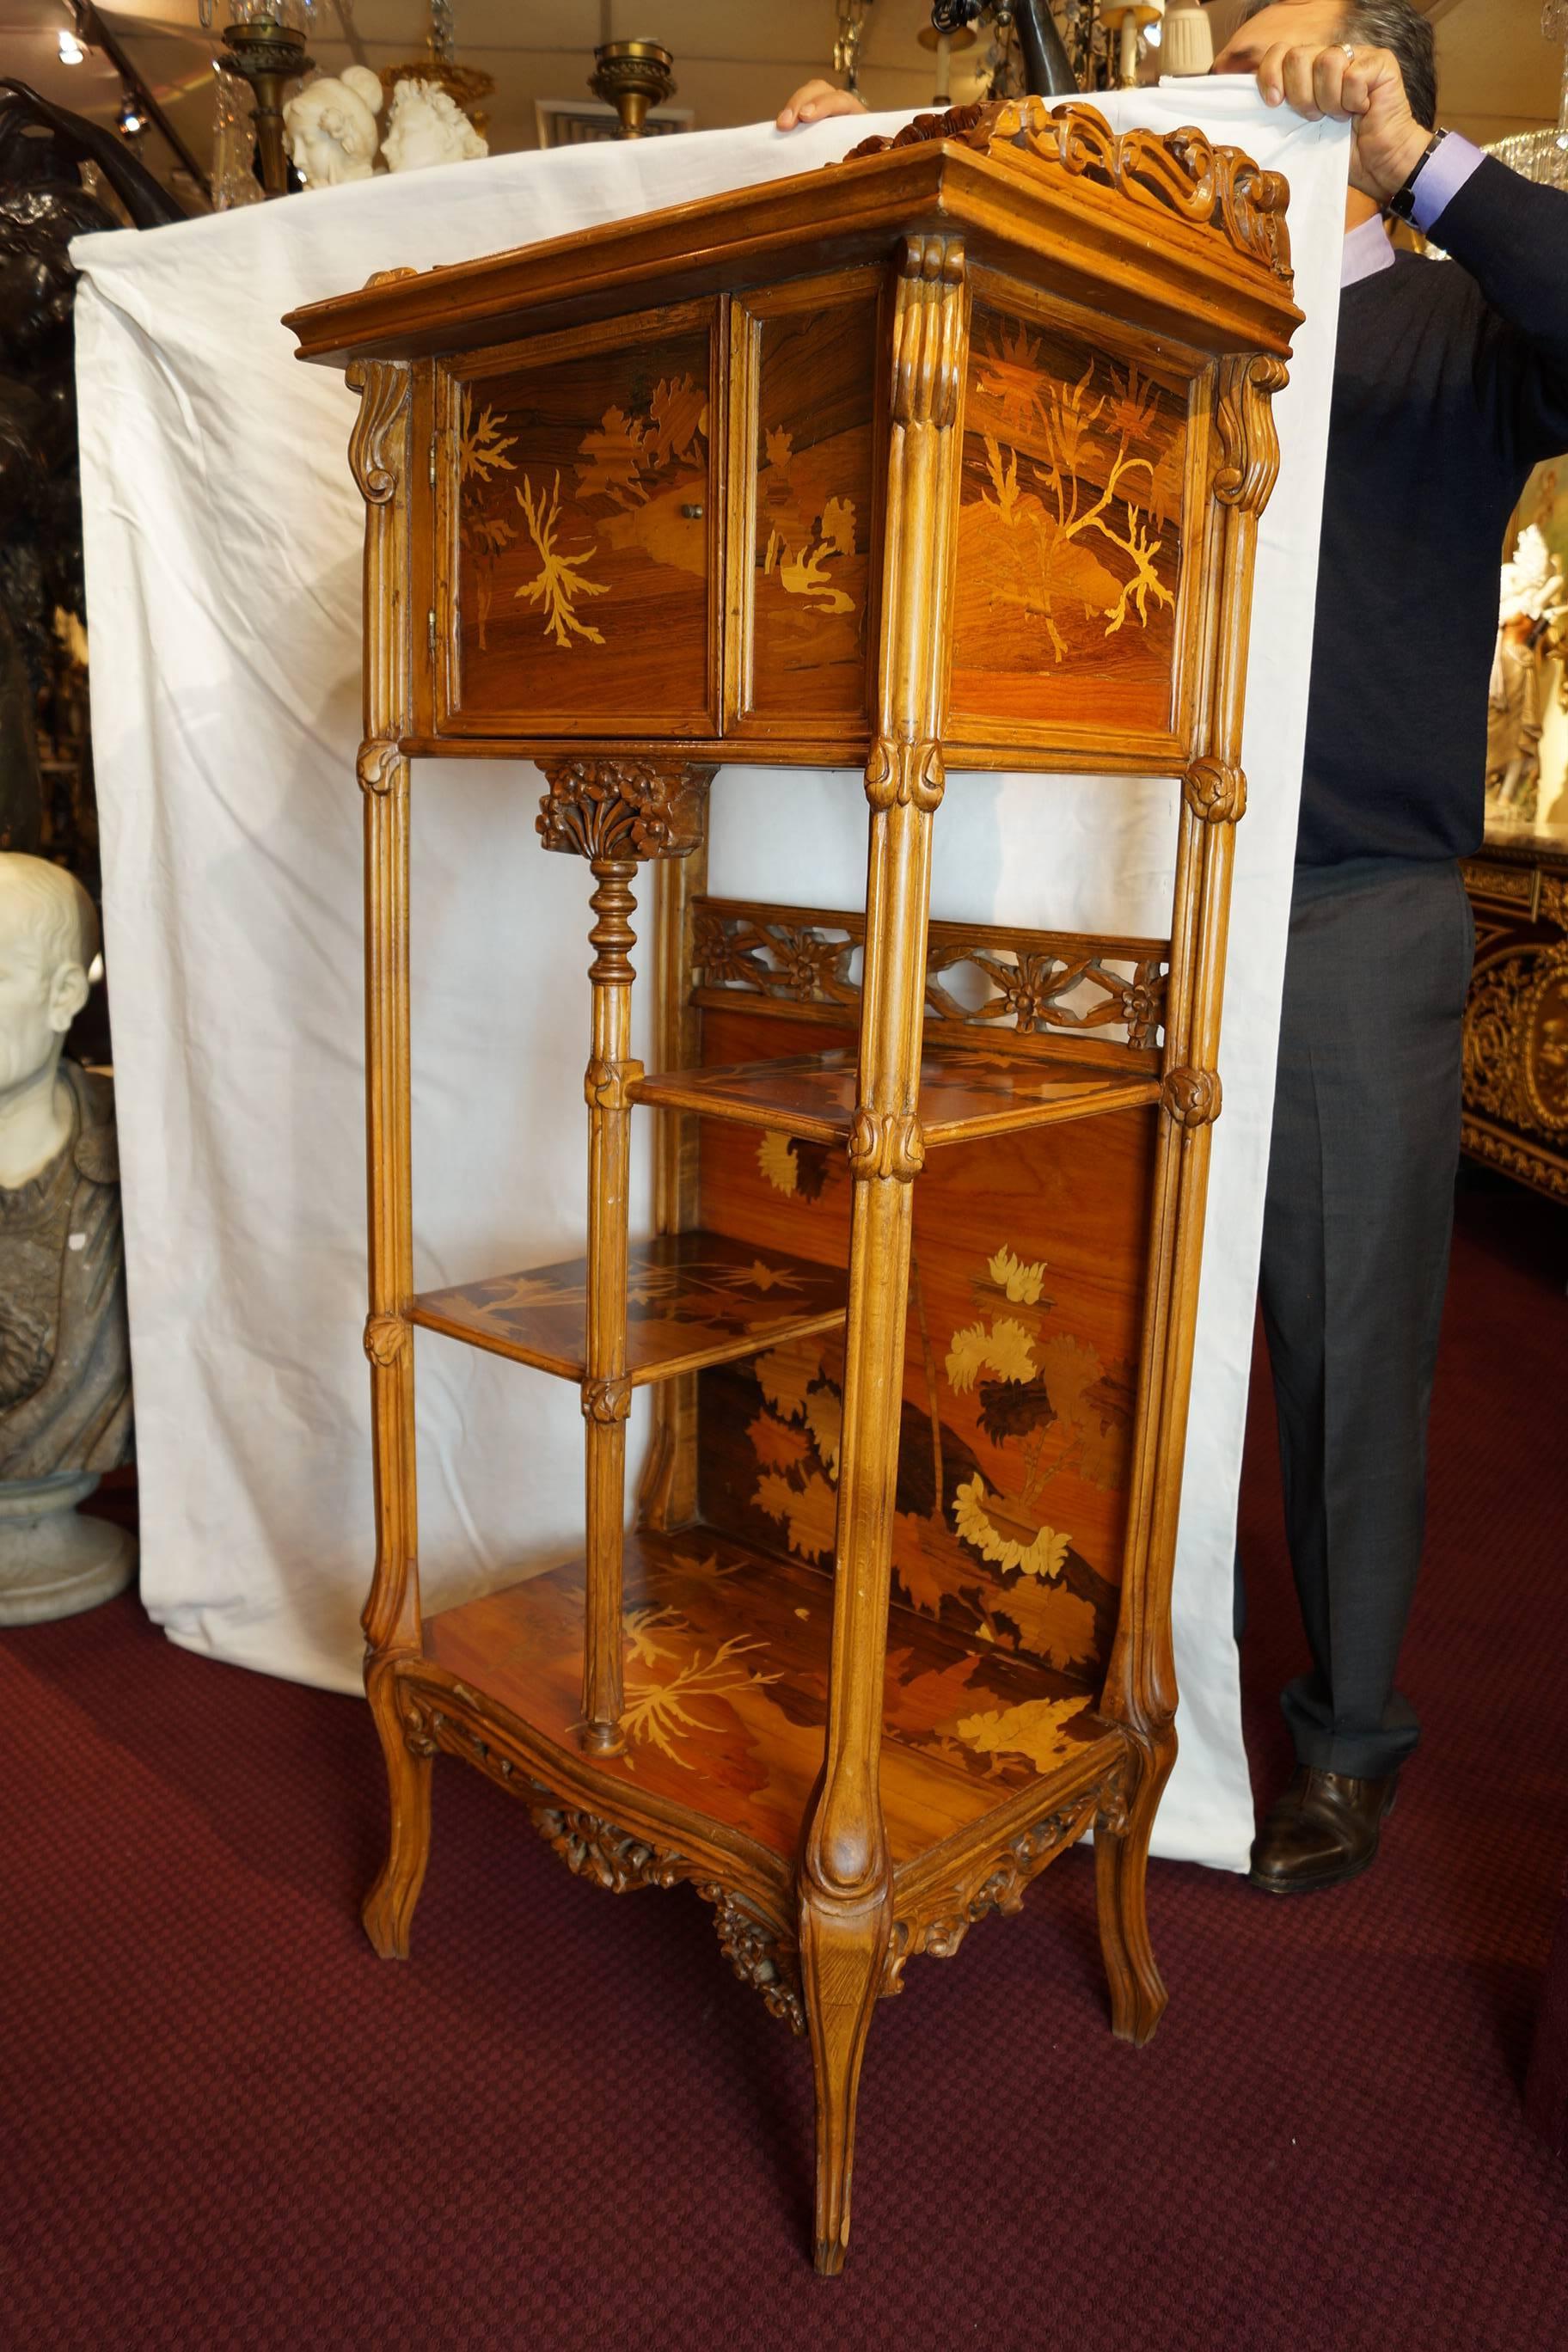 Magnificent pair of tall inlaid marquetry display cabinets with floral design
in the style of Louis Majorelle.
Stock Number: F63